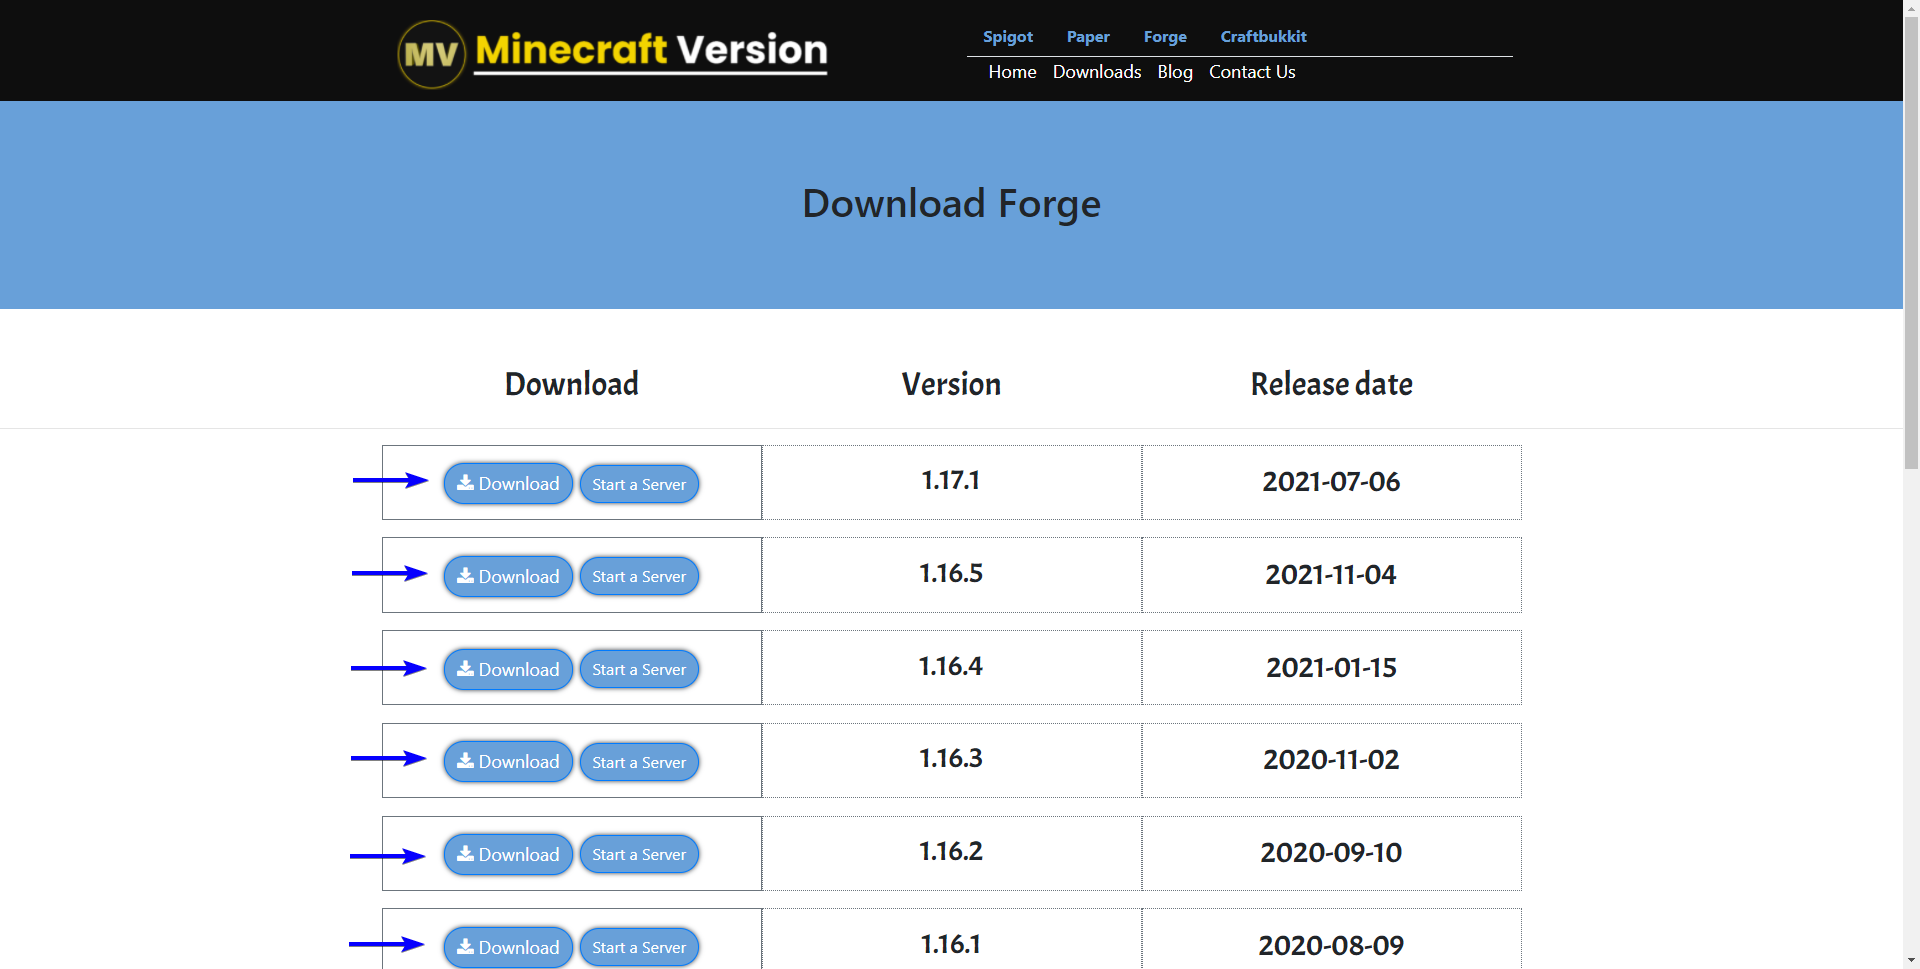 Download your Forge version